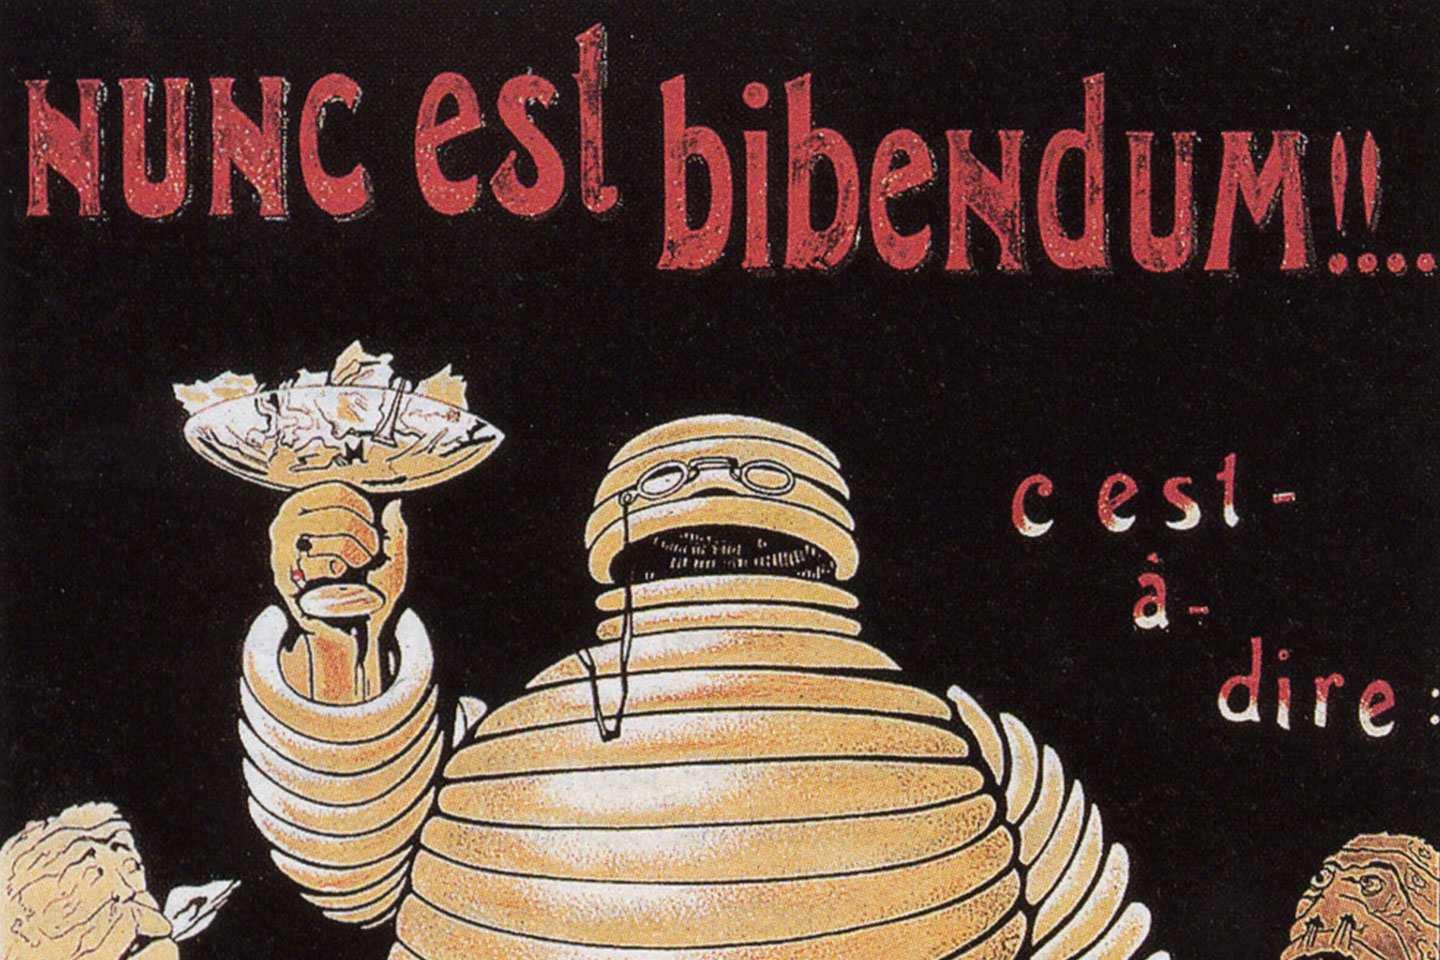 Expand your culinary culture with these Michelin Guide trivia facts